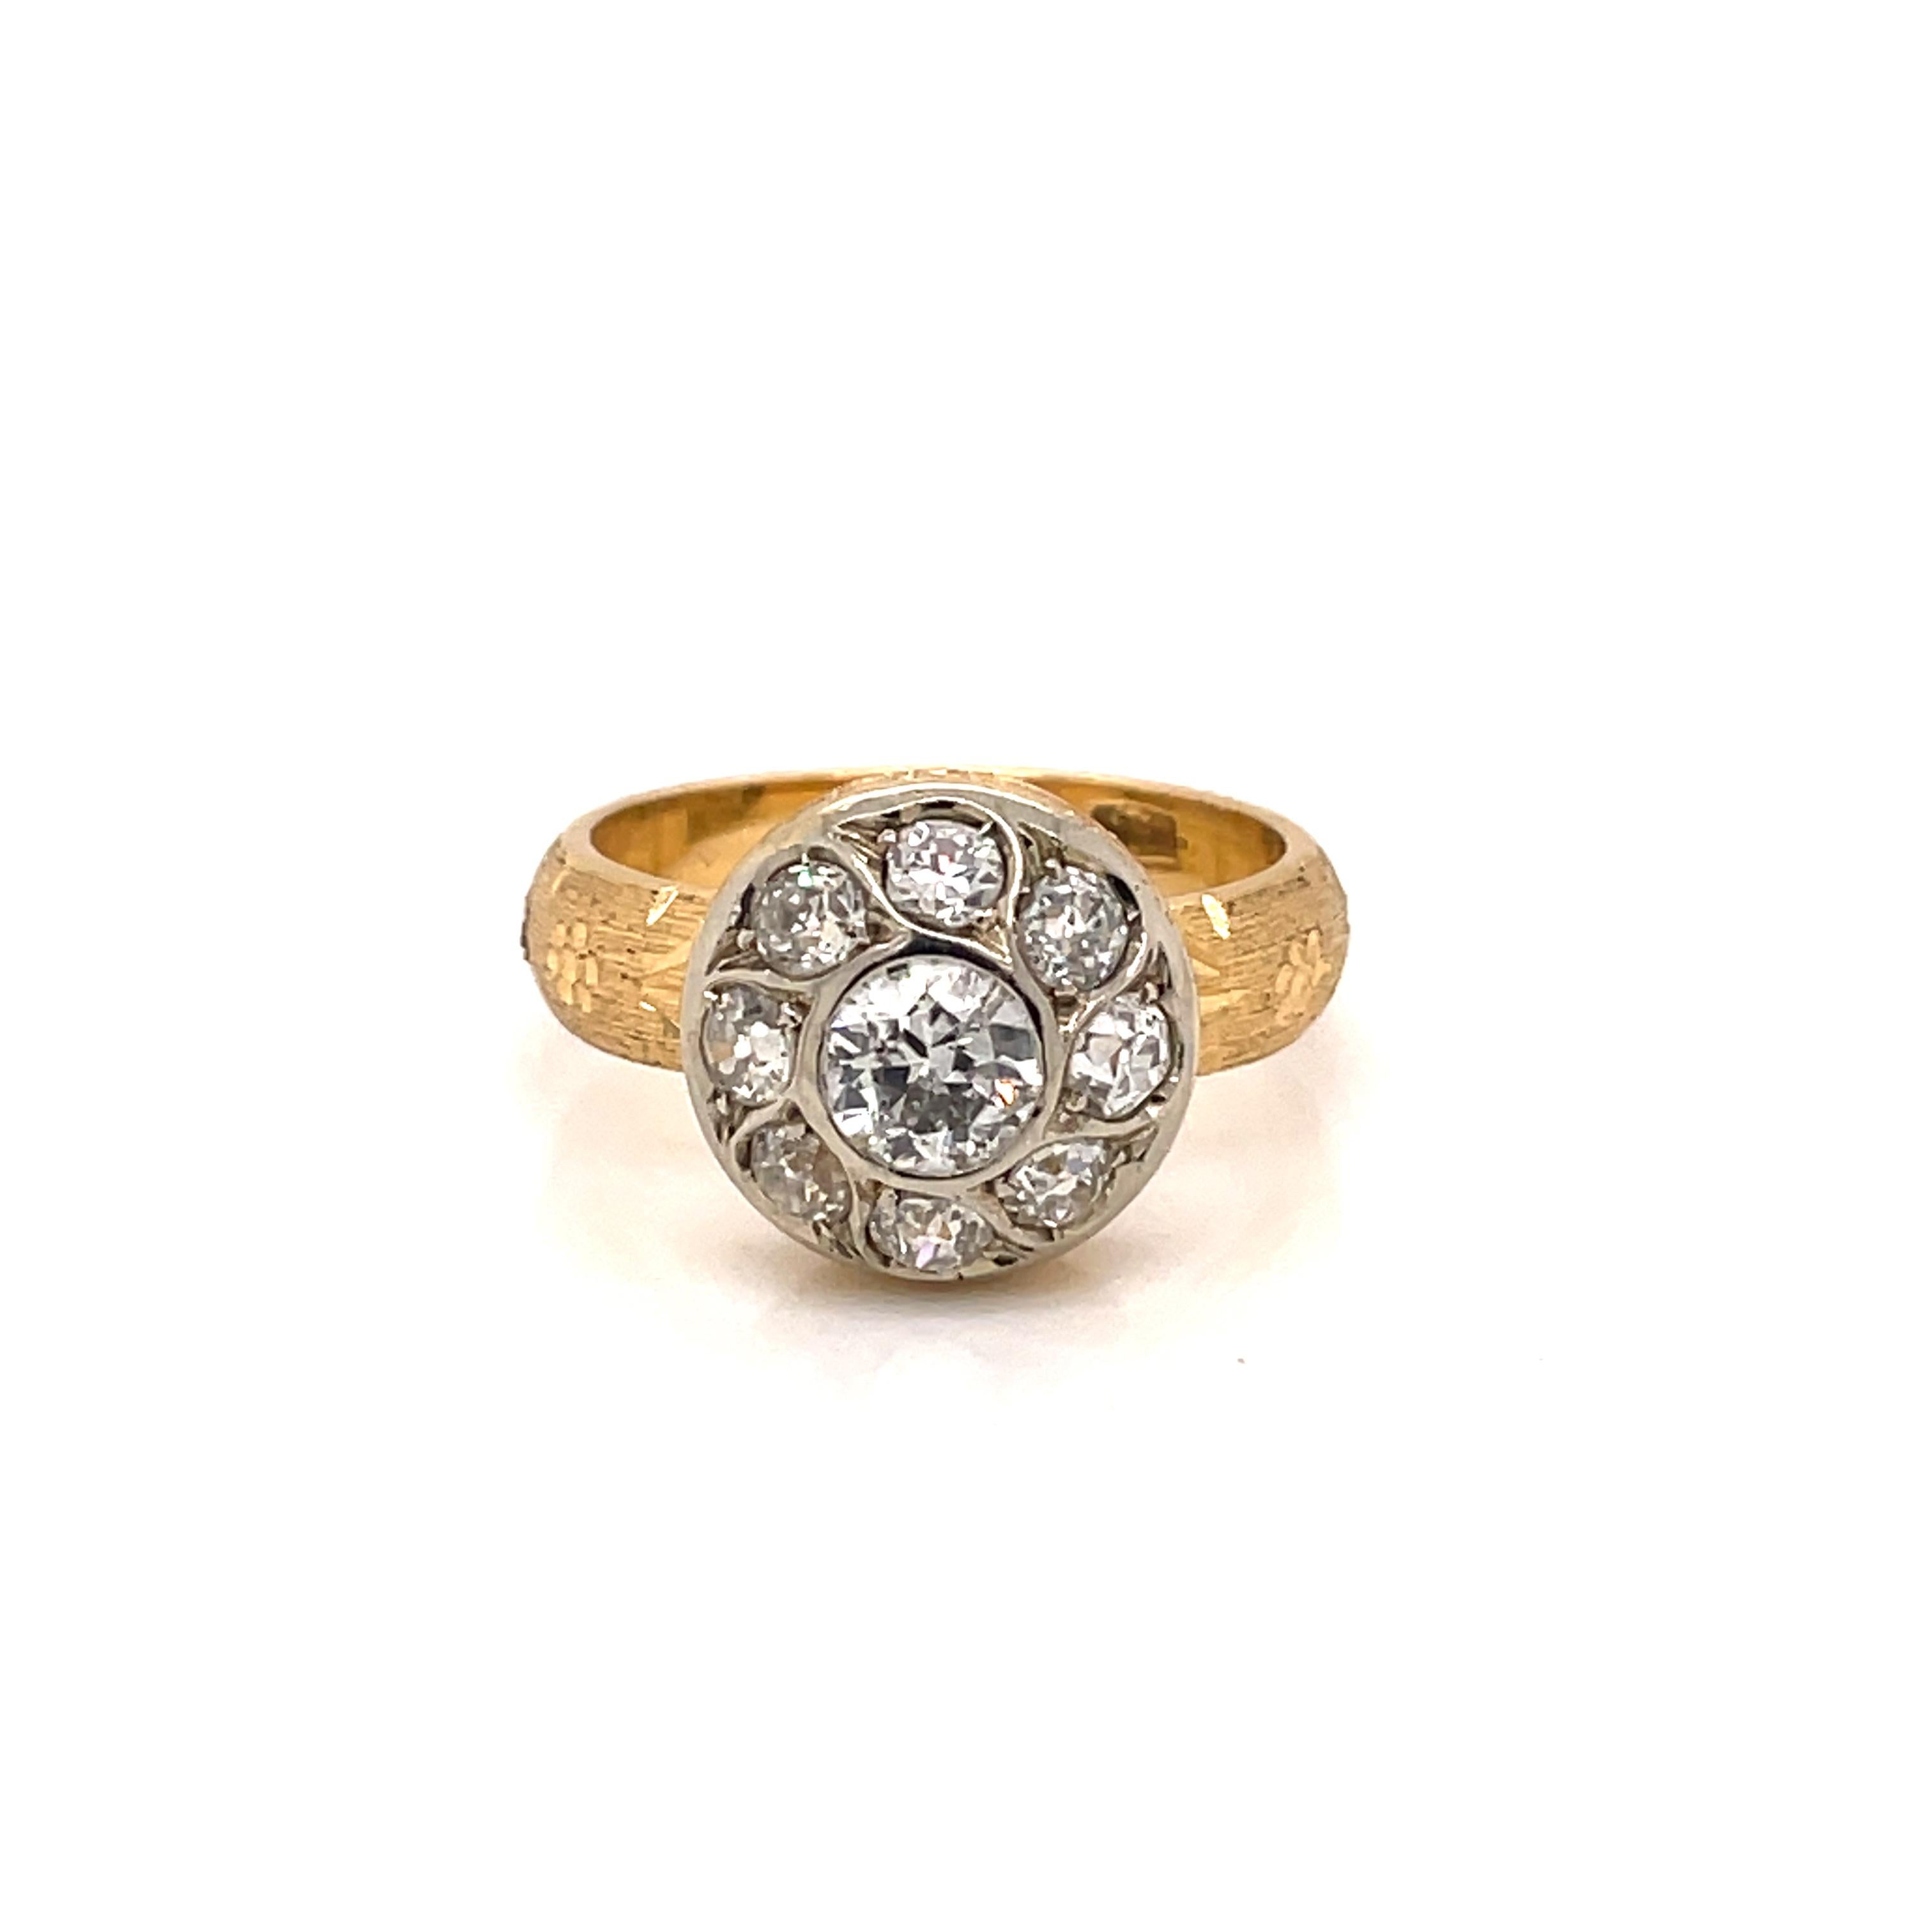 Beautiful Florentine cluster ring, handcrafted in 18k yellow and white Gold, featuring 1.20 carat of colorless European cut diamonds, the engraved band make this ring unique. 